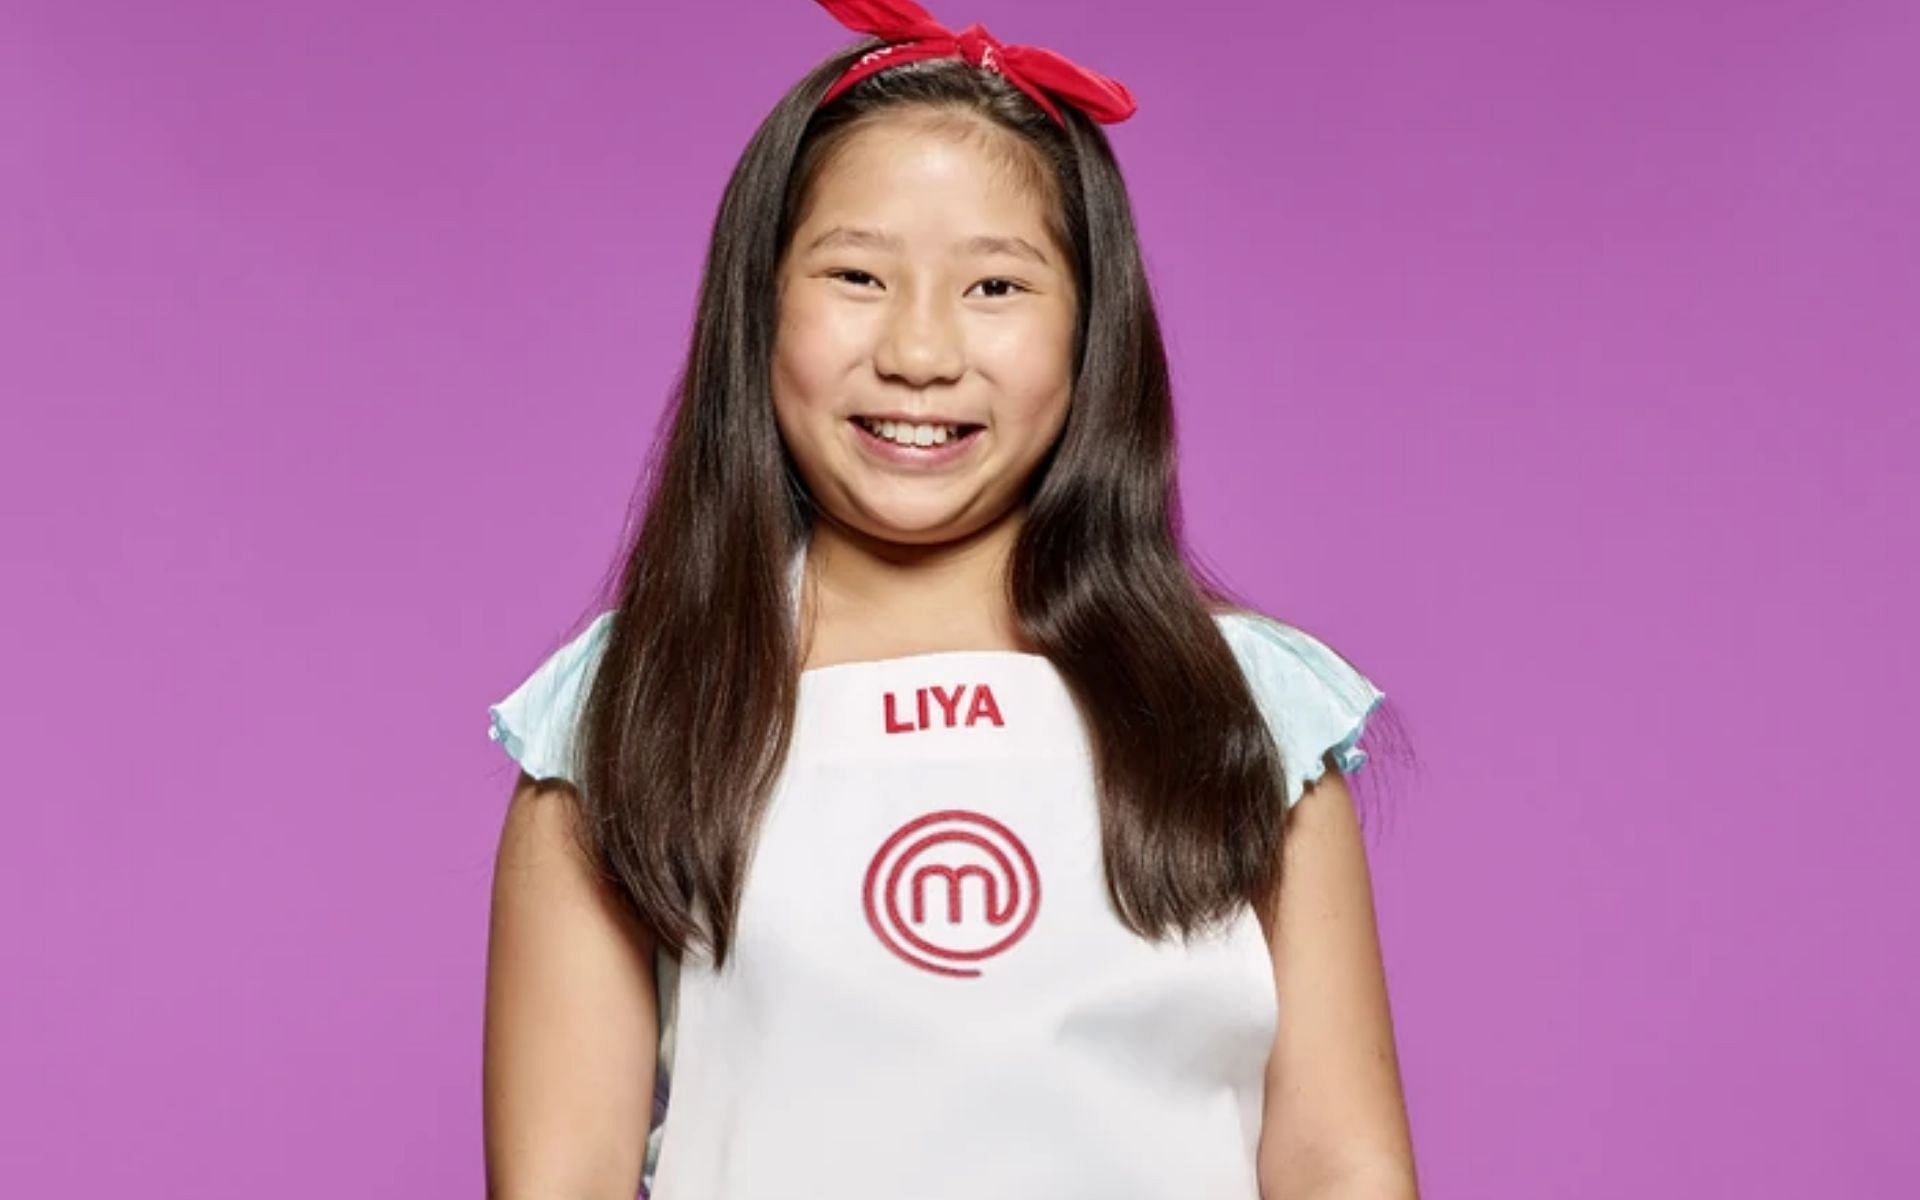 Liya Chu reaches the top four and becomes the first finalist of MasterChef Season 8 (Images via masterchef.fandom)